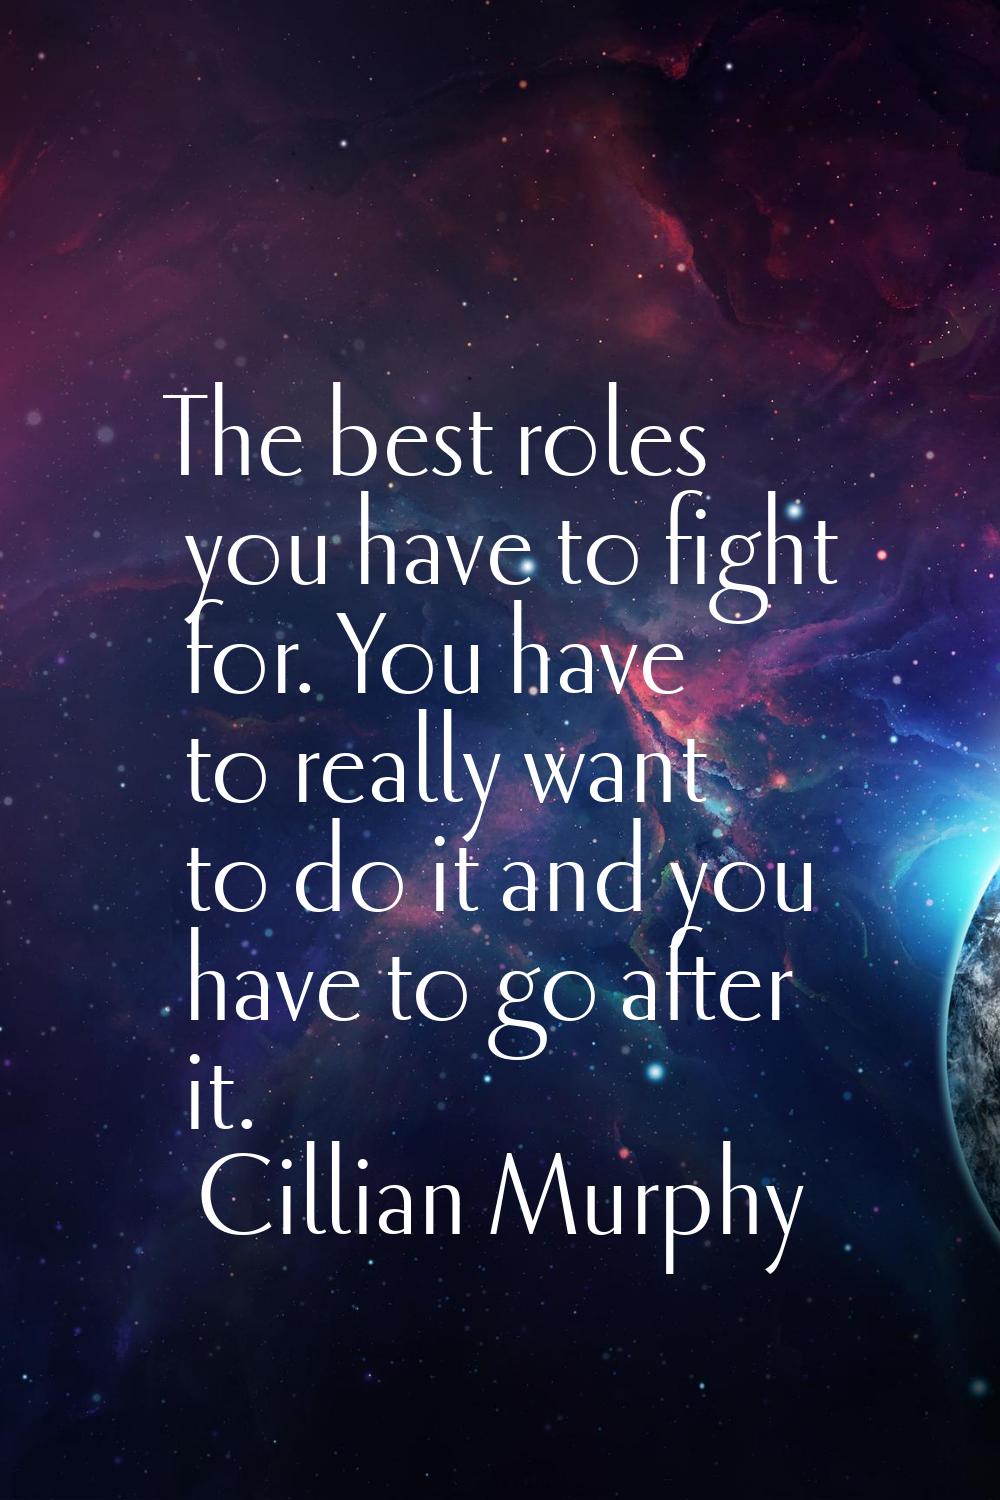 The best roles you have to fight for. You have to really want to do it and you have to go after it.